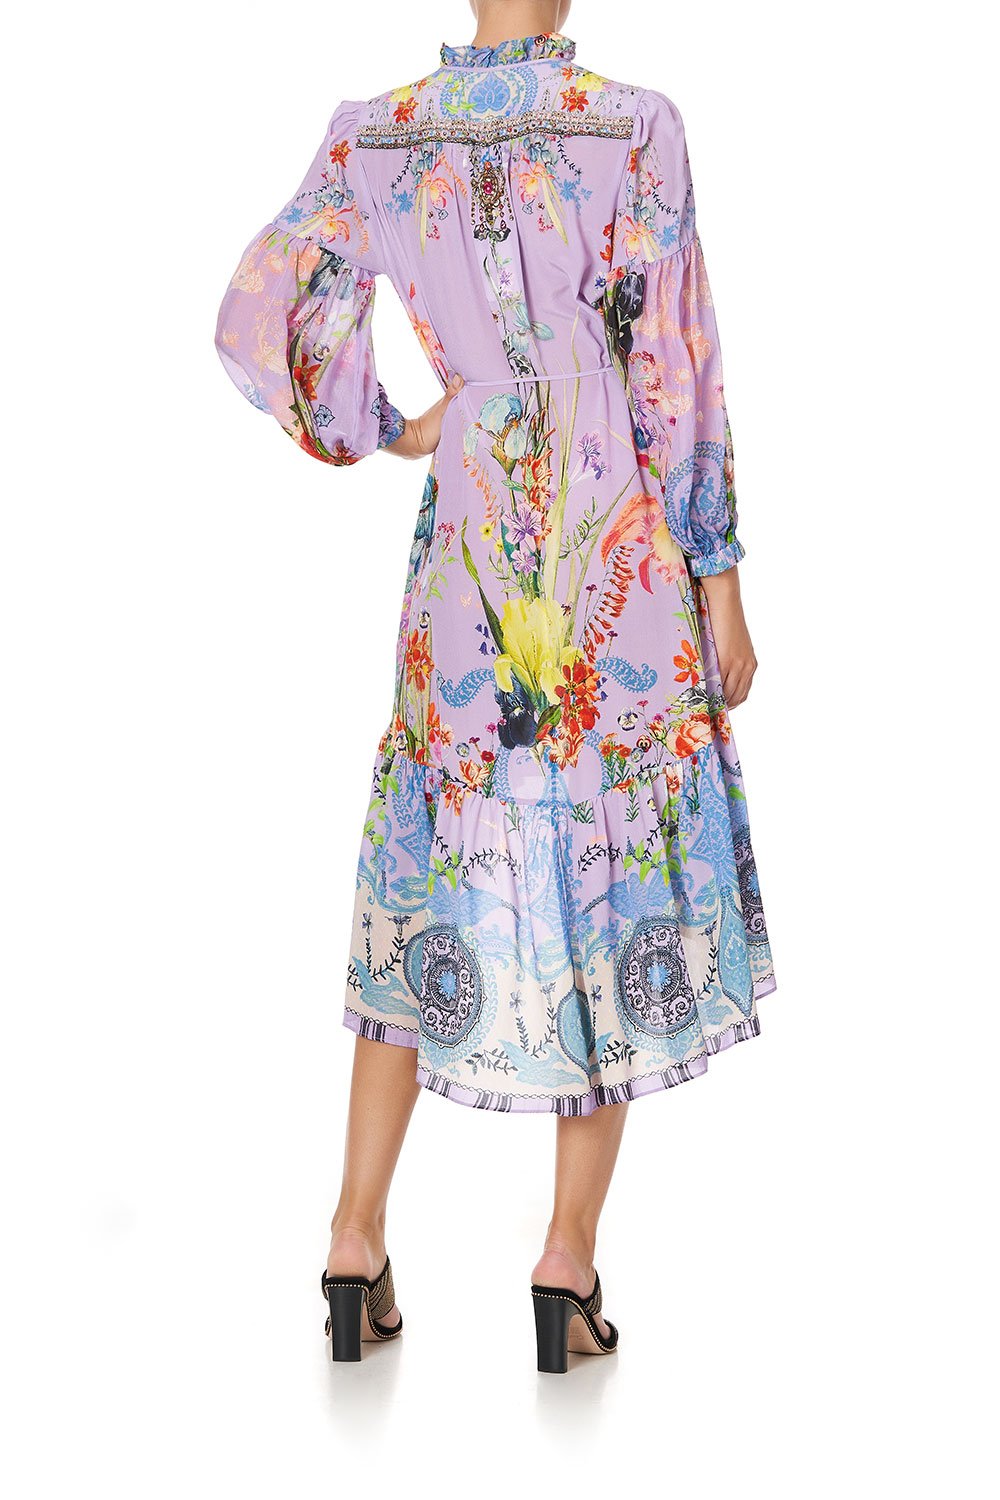 Load image into Gallery viewer, Lilac Summer Dress in Floral Print
